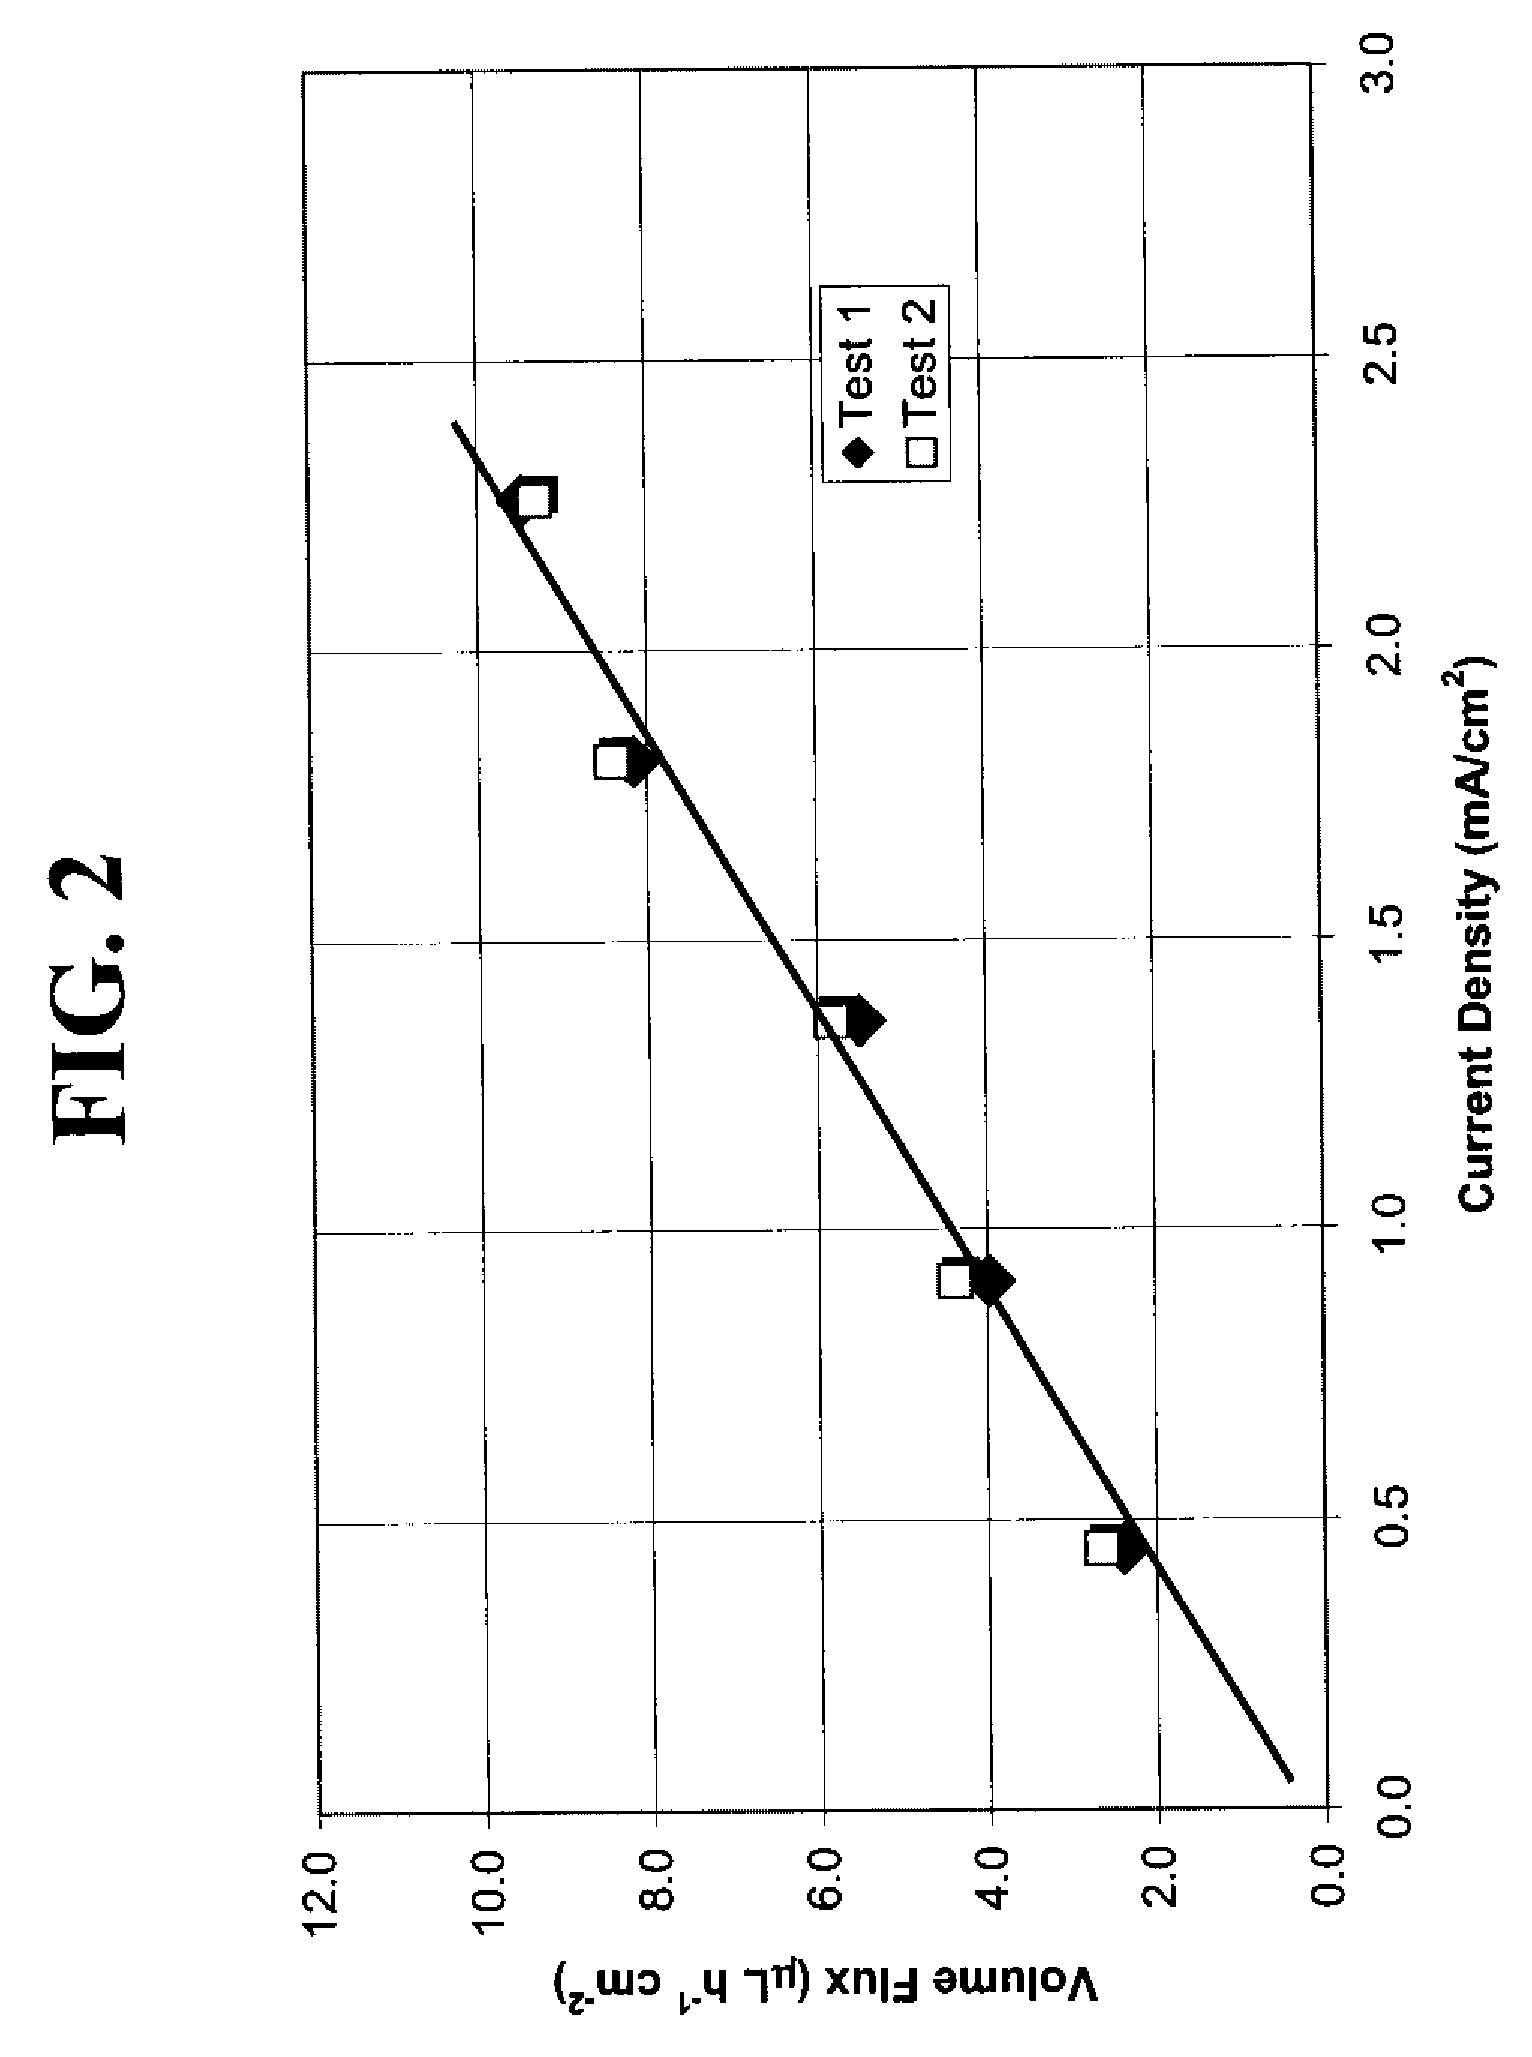 Fluid delivery device having an electrochemical pump with an ion-exchange membrane and associated method